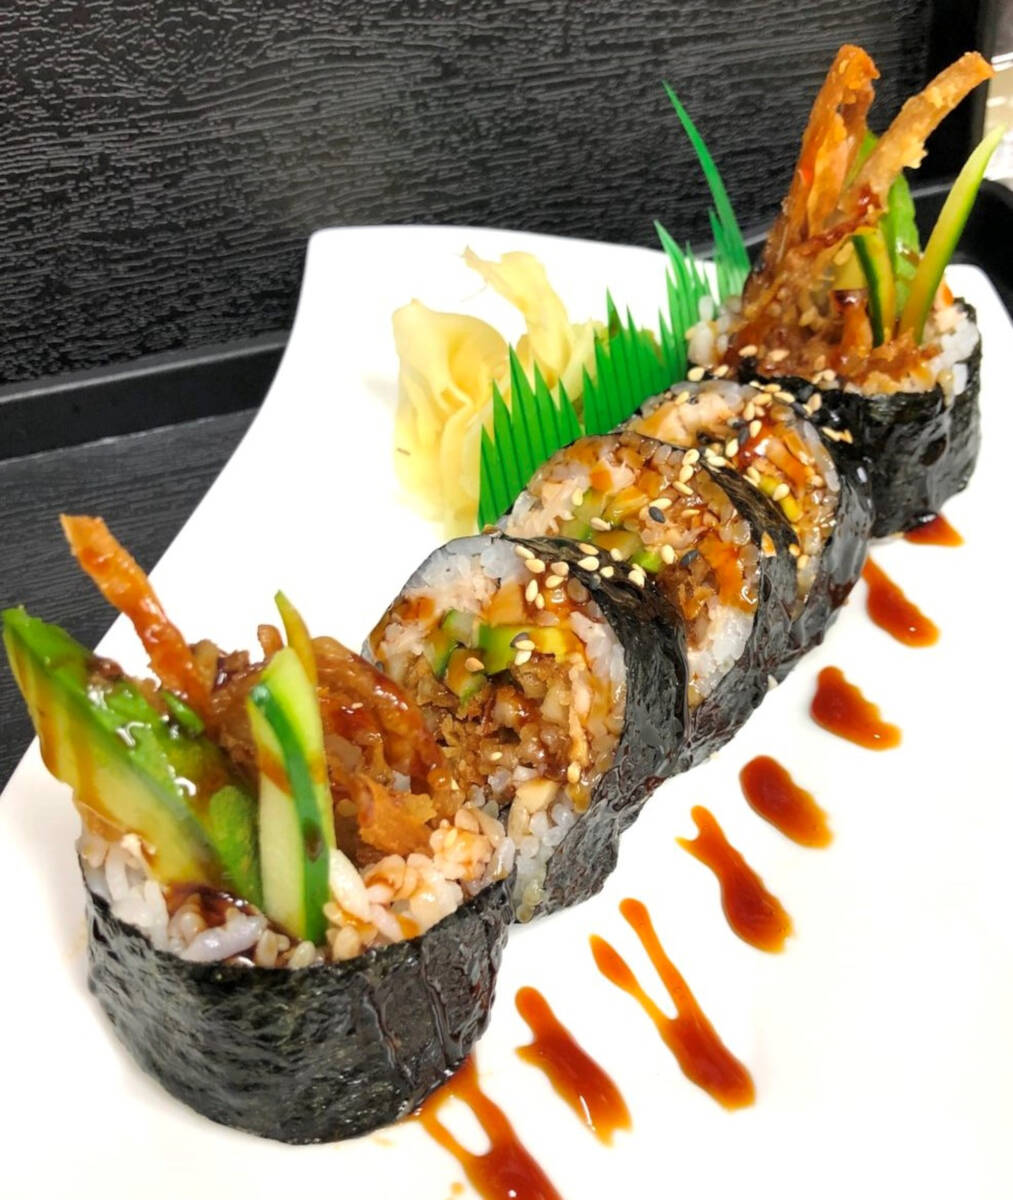 Daikon Sushi is serving this spider roll and other dishes for Las Vegas Vegan Dining Month in J ...